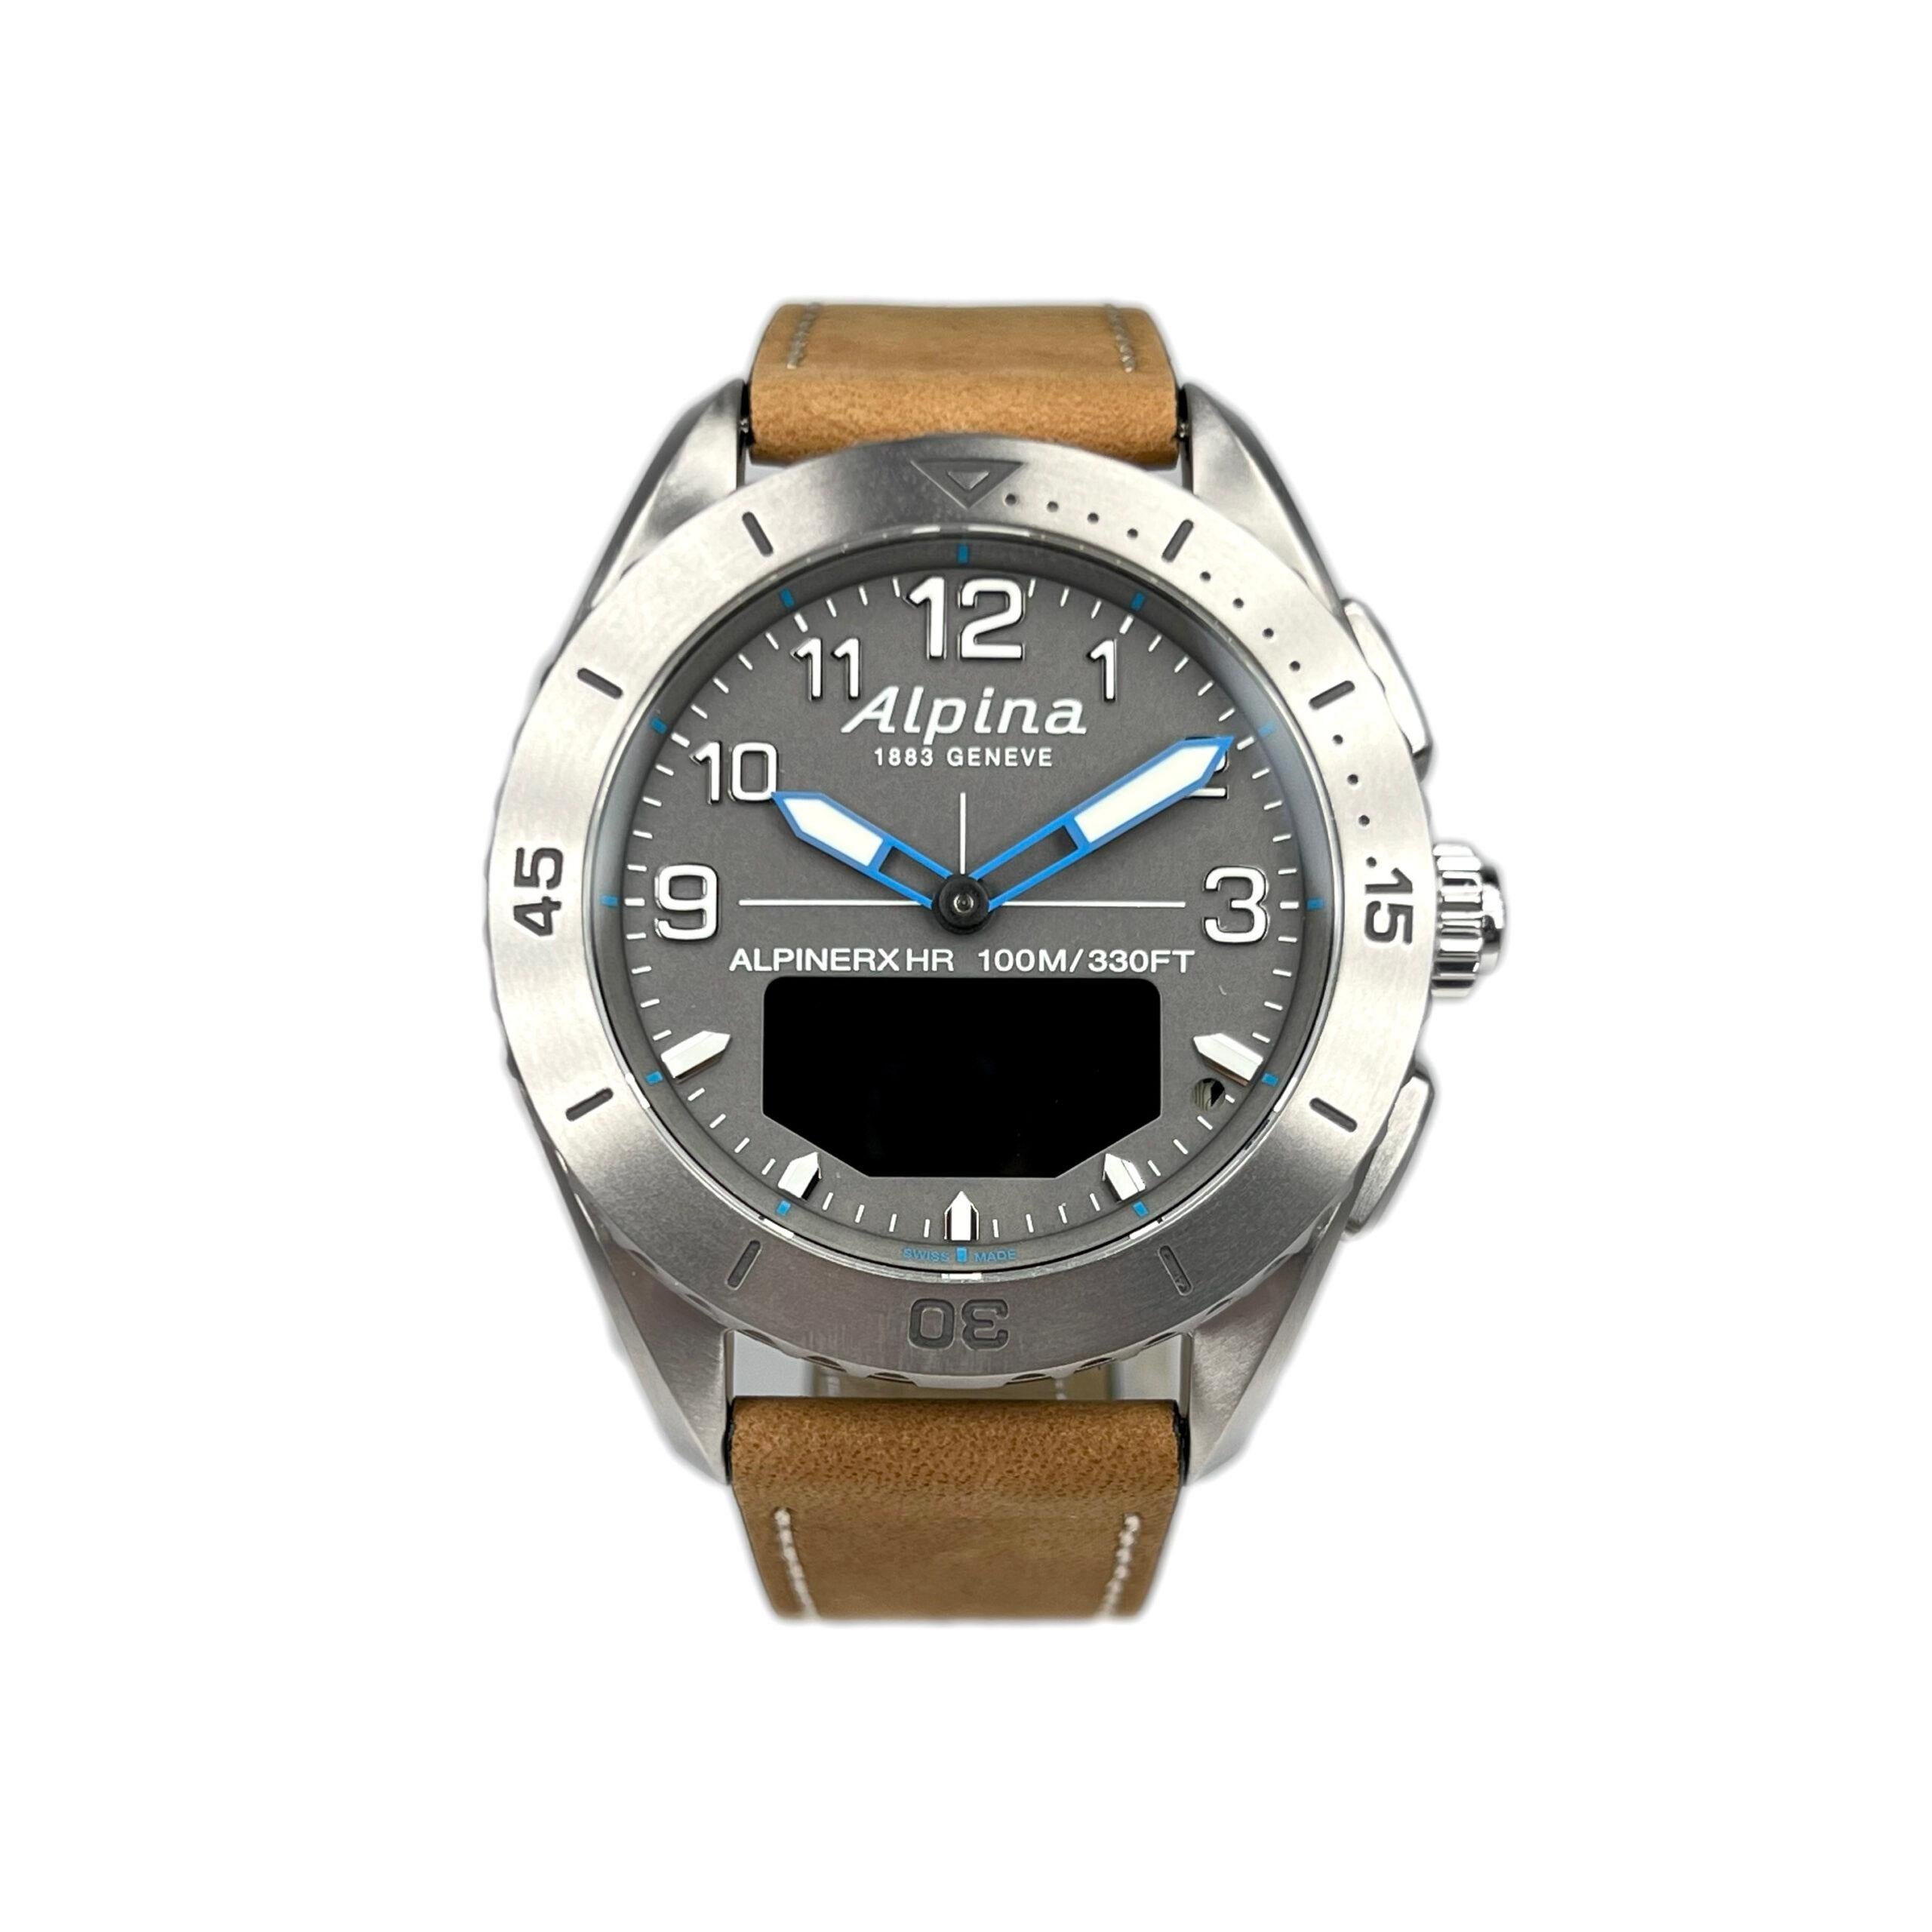 This Men’s Watch features a gray dial with mat finishing and silver color indices that have been coated with a white luminous treatment. Grey inner ring with blue markers. Blue hands with white luminous treatment. Amoled touch screen. The case